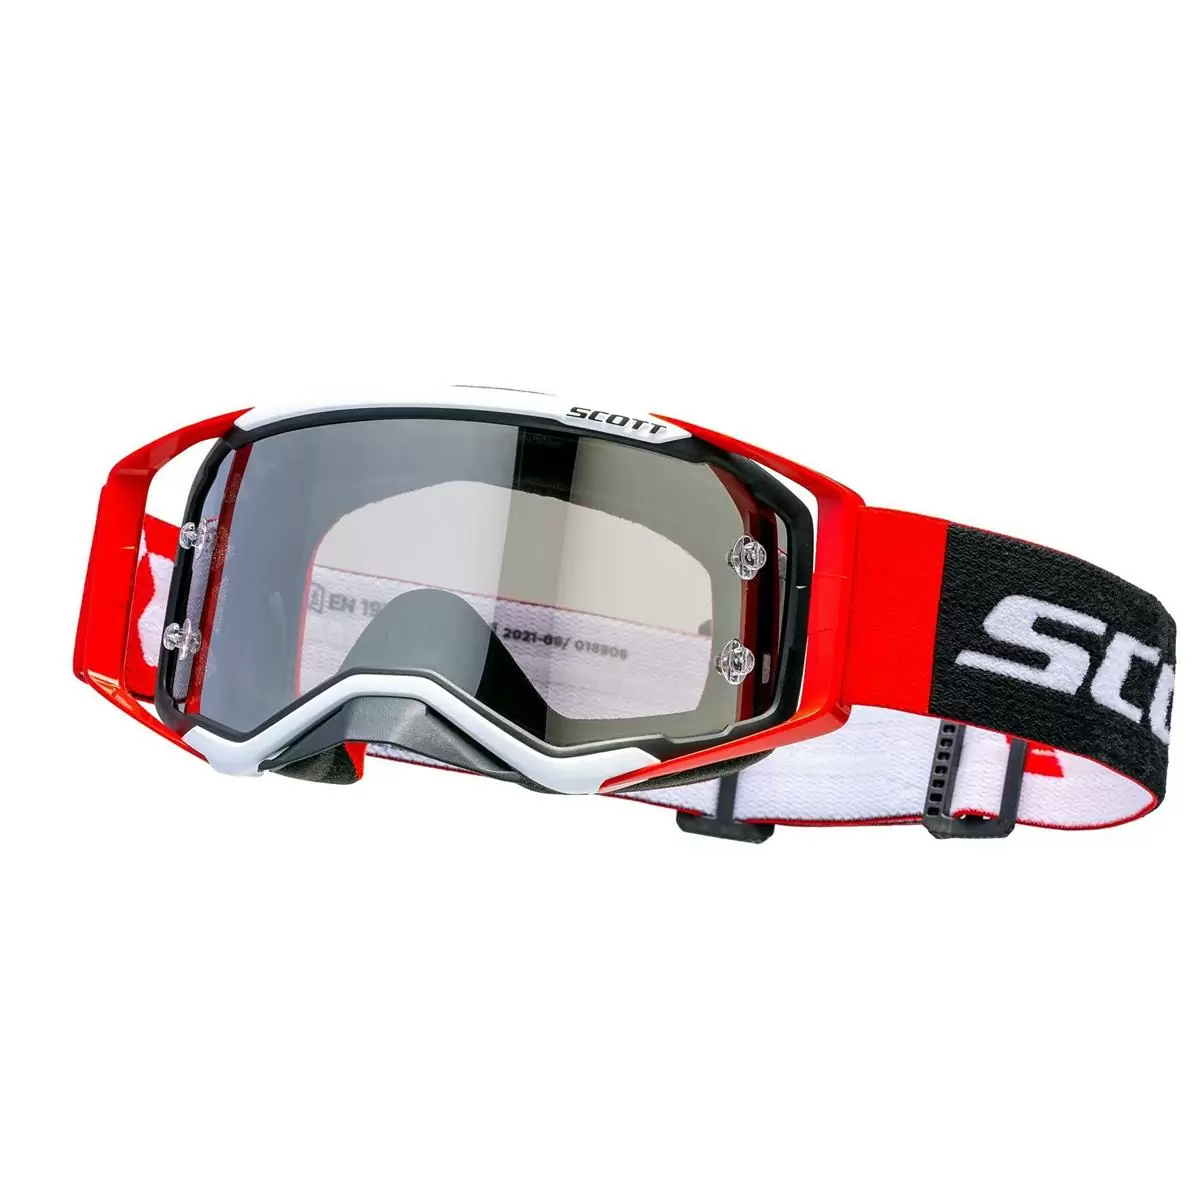 Prospect Mask Black/Red With Chrome Works Silver Lens #3